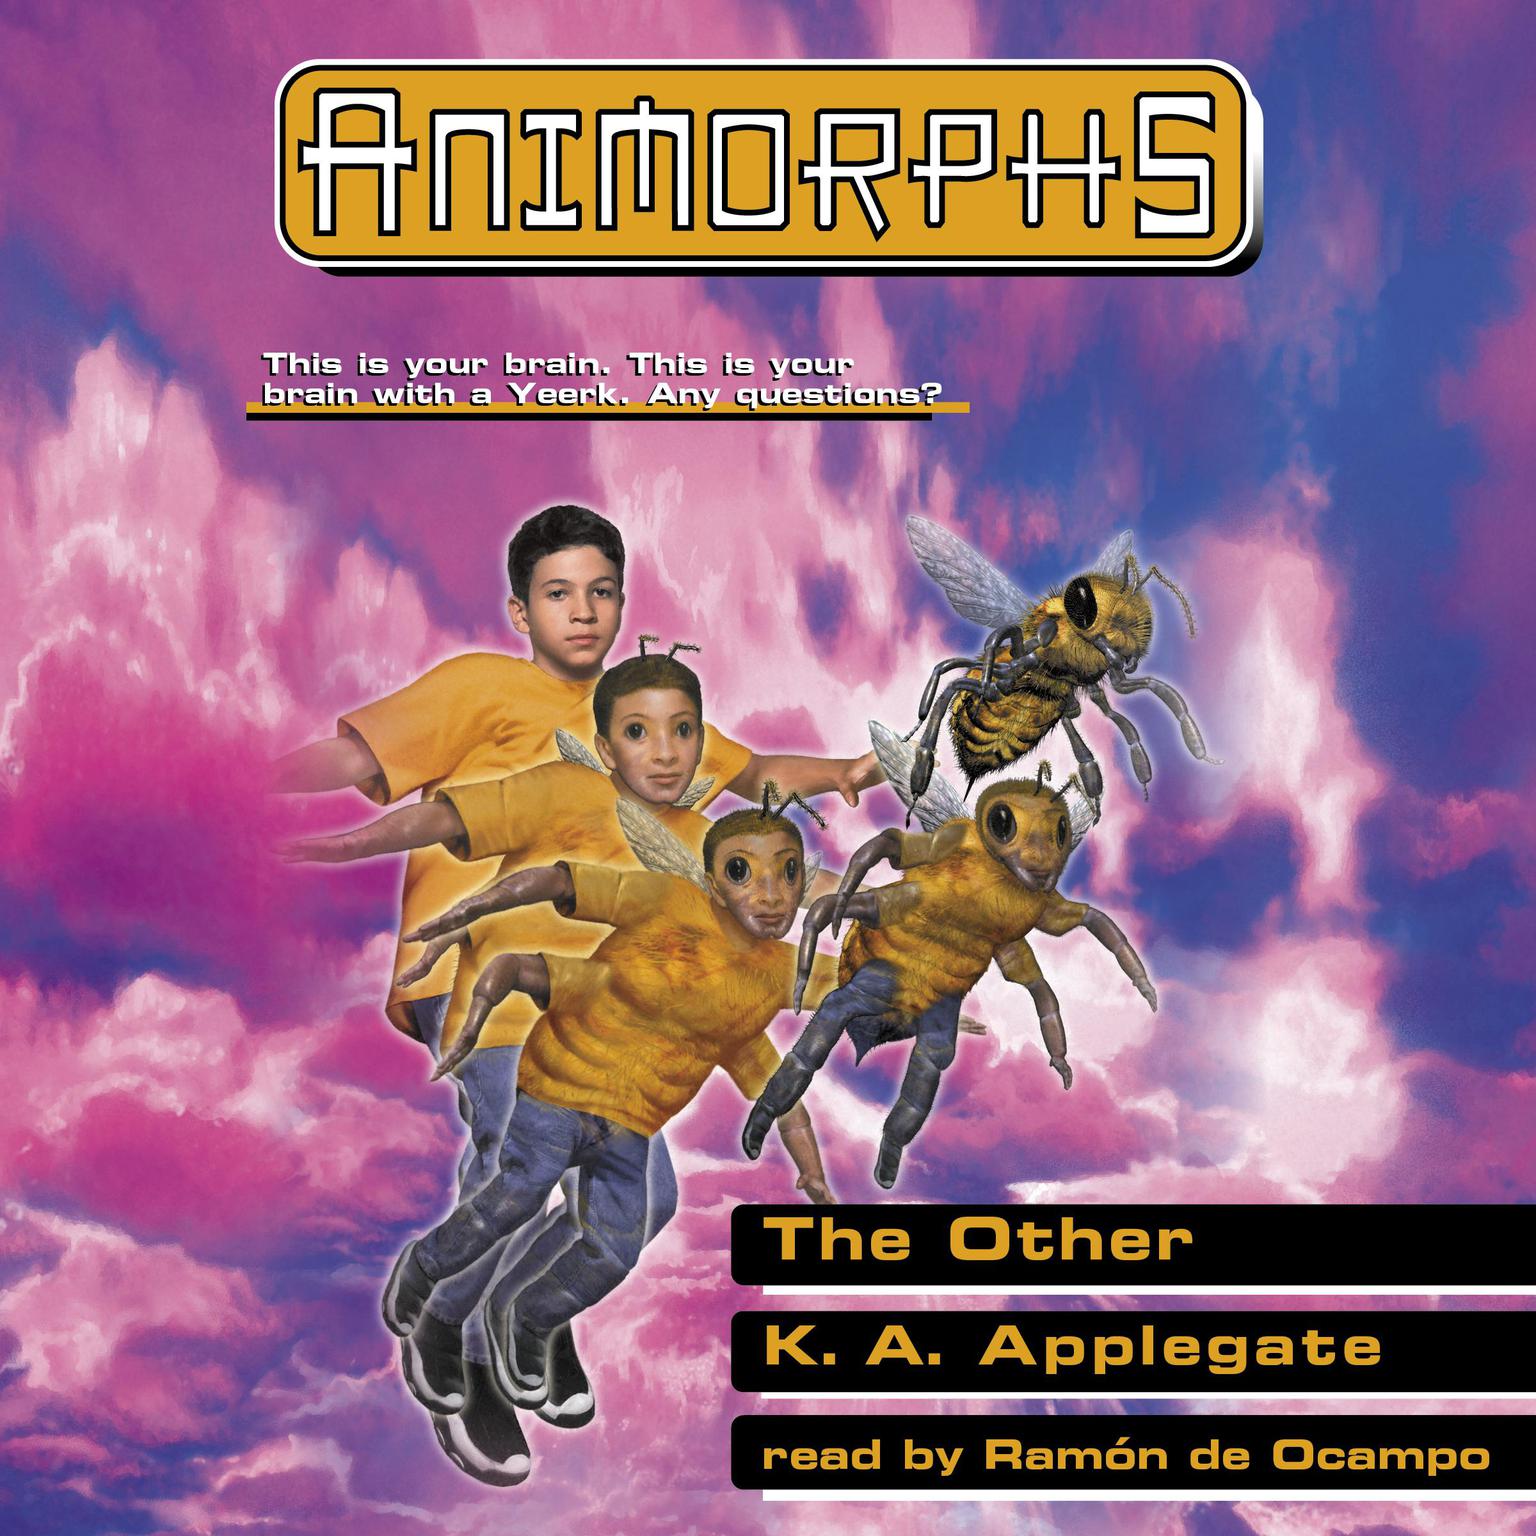 The Other (Animorphs #40) Audiobook, by K. A. Applegate